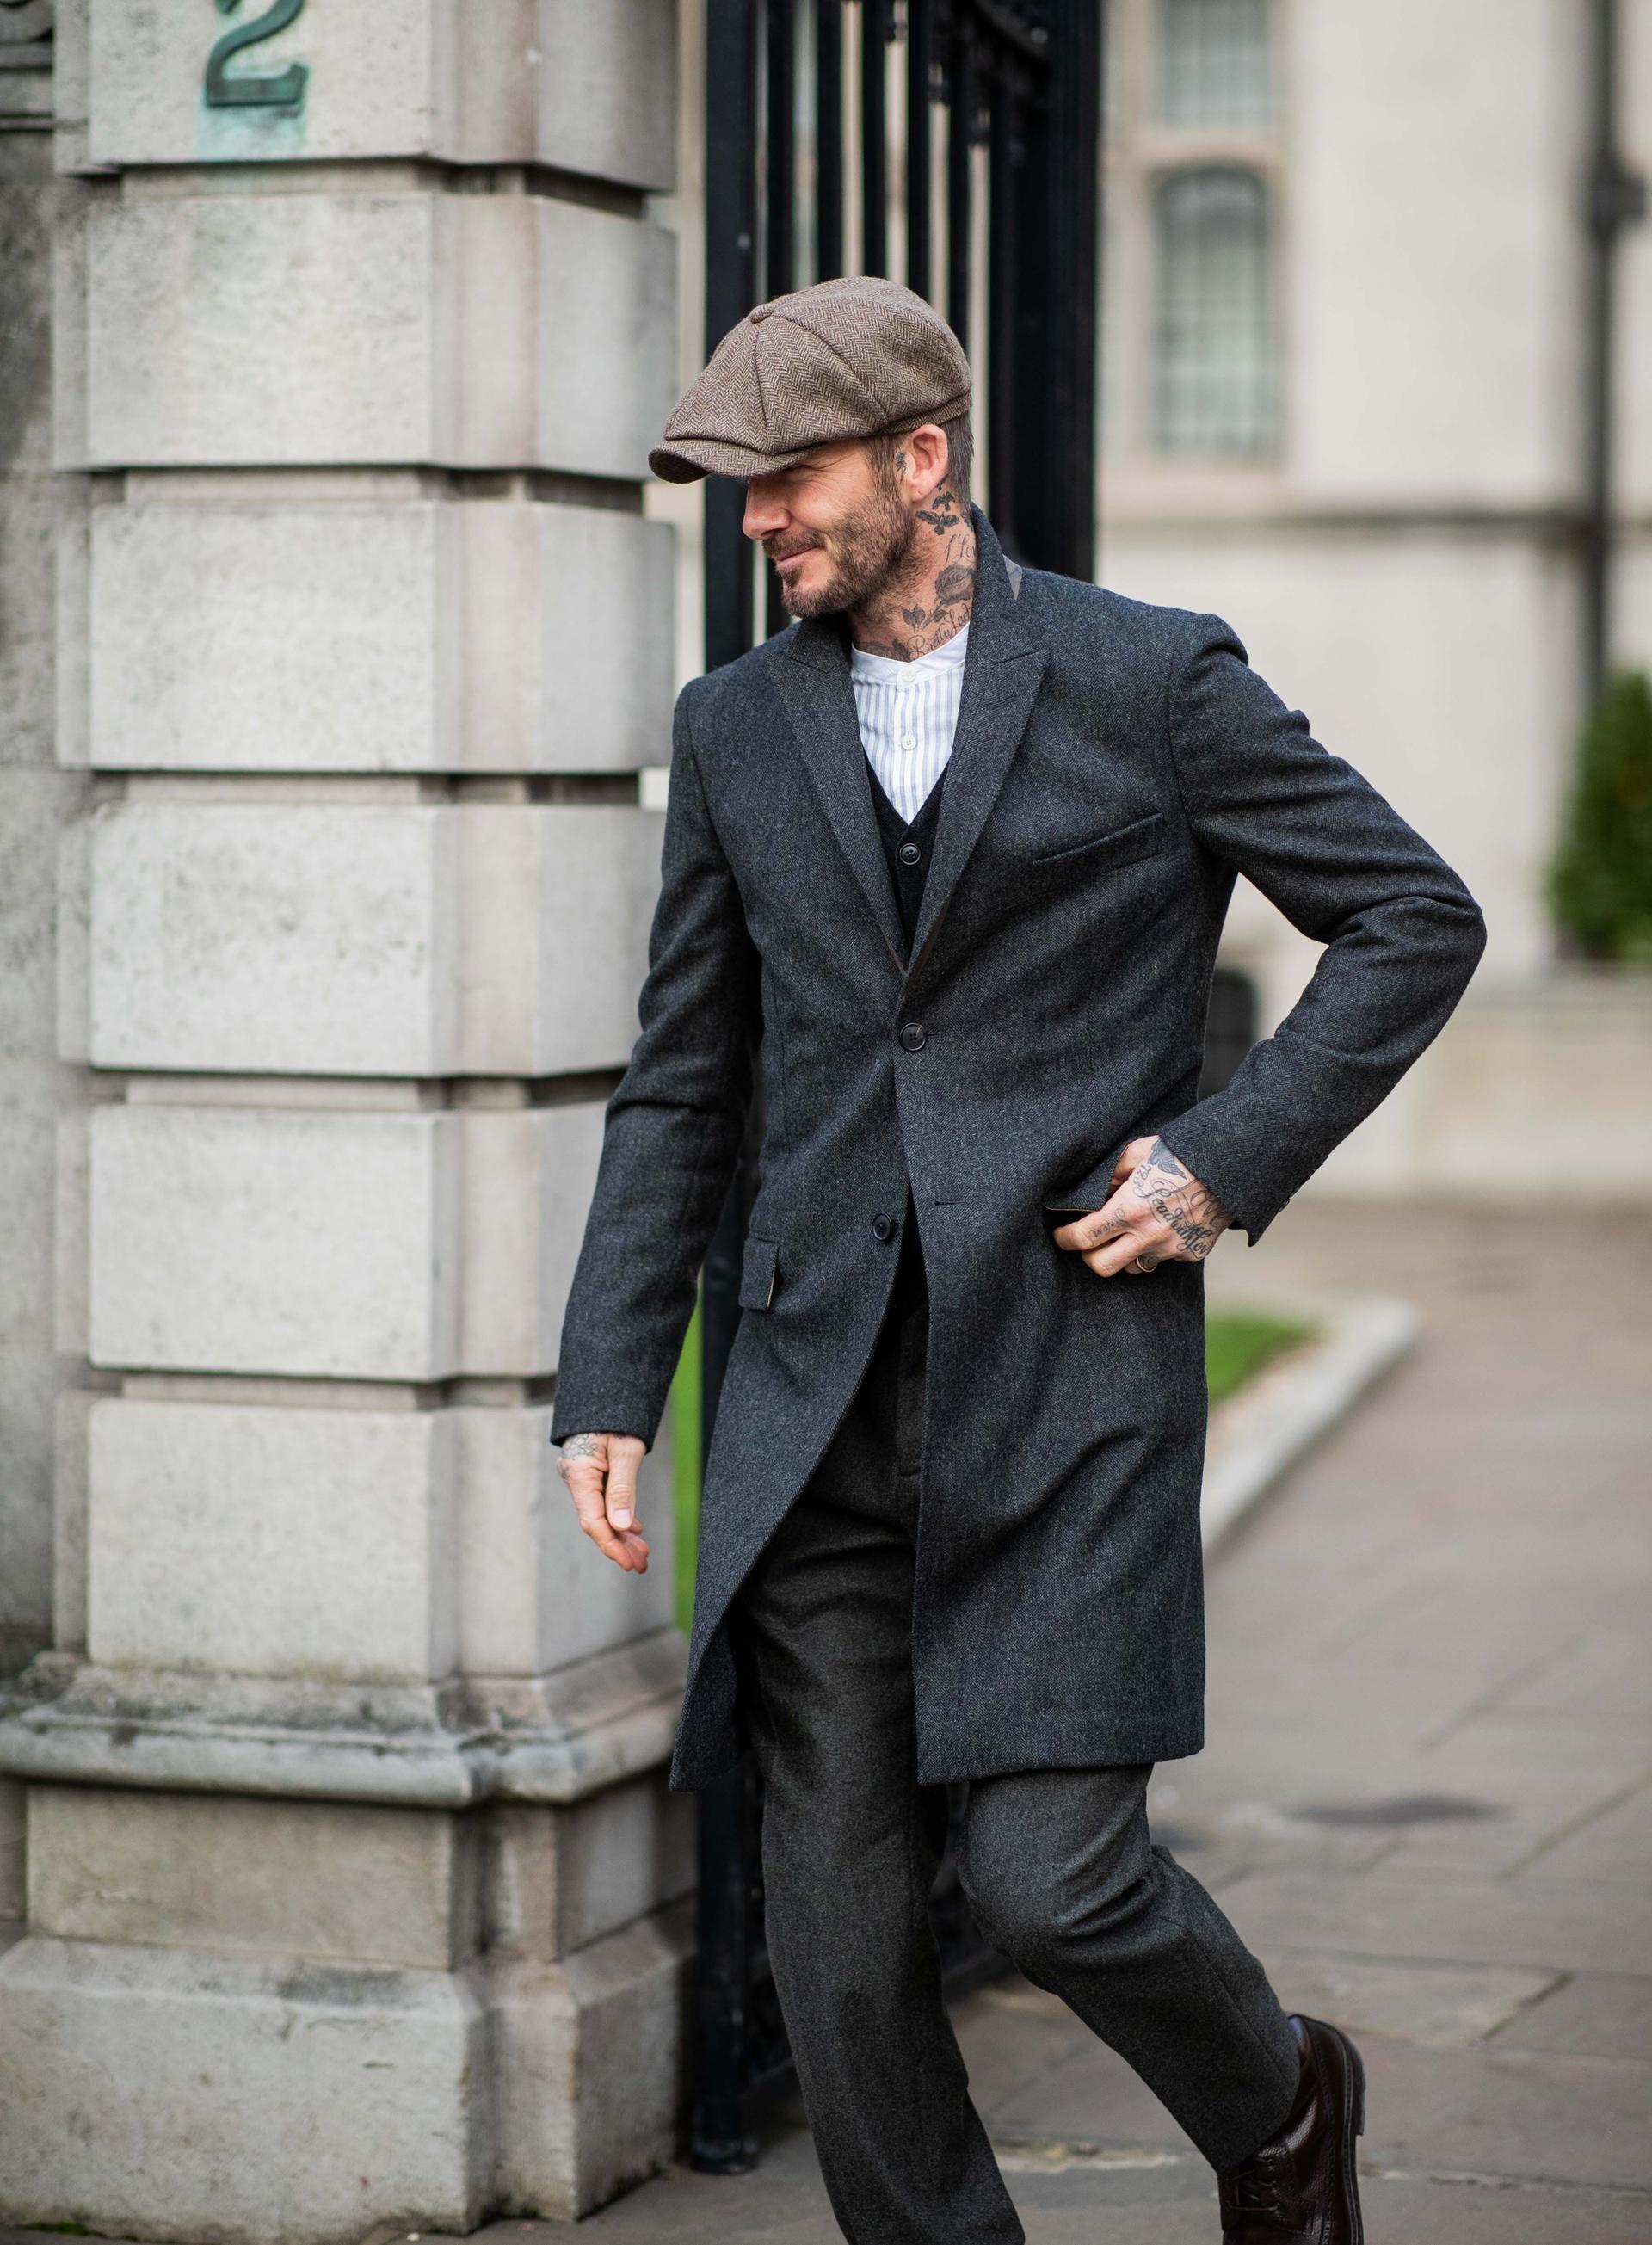 Head To Head A History Of The Flat Cap Throughout Fashion